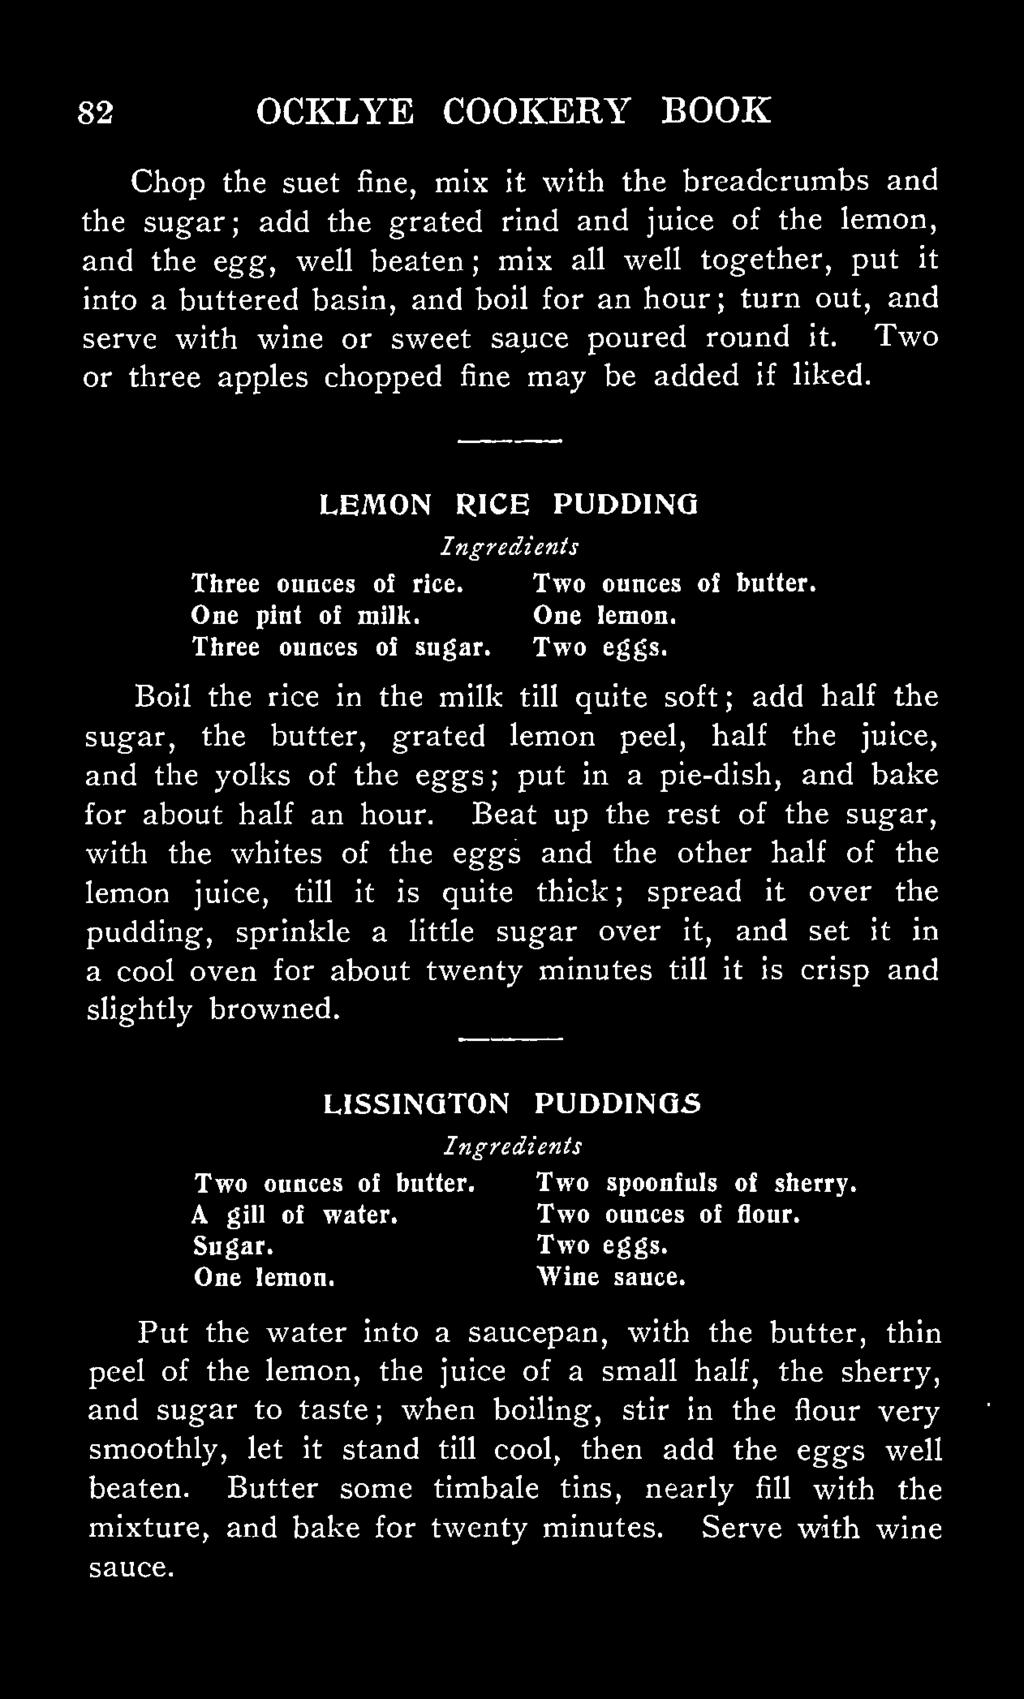 LEMON RICE Ingredienis PUDDING Three ounces of rice. Two ounces of butter. One pint of millt. One lemon. Tliree ounces of sugar. Two eggs.